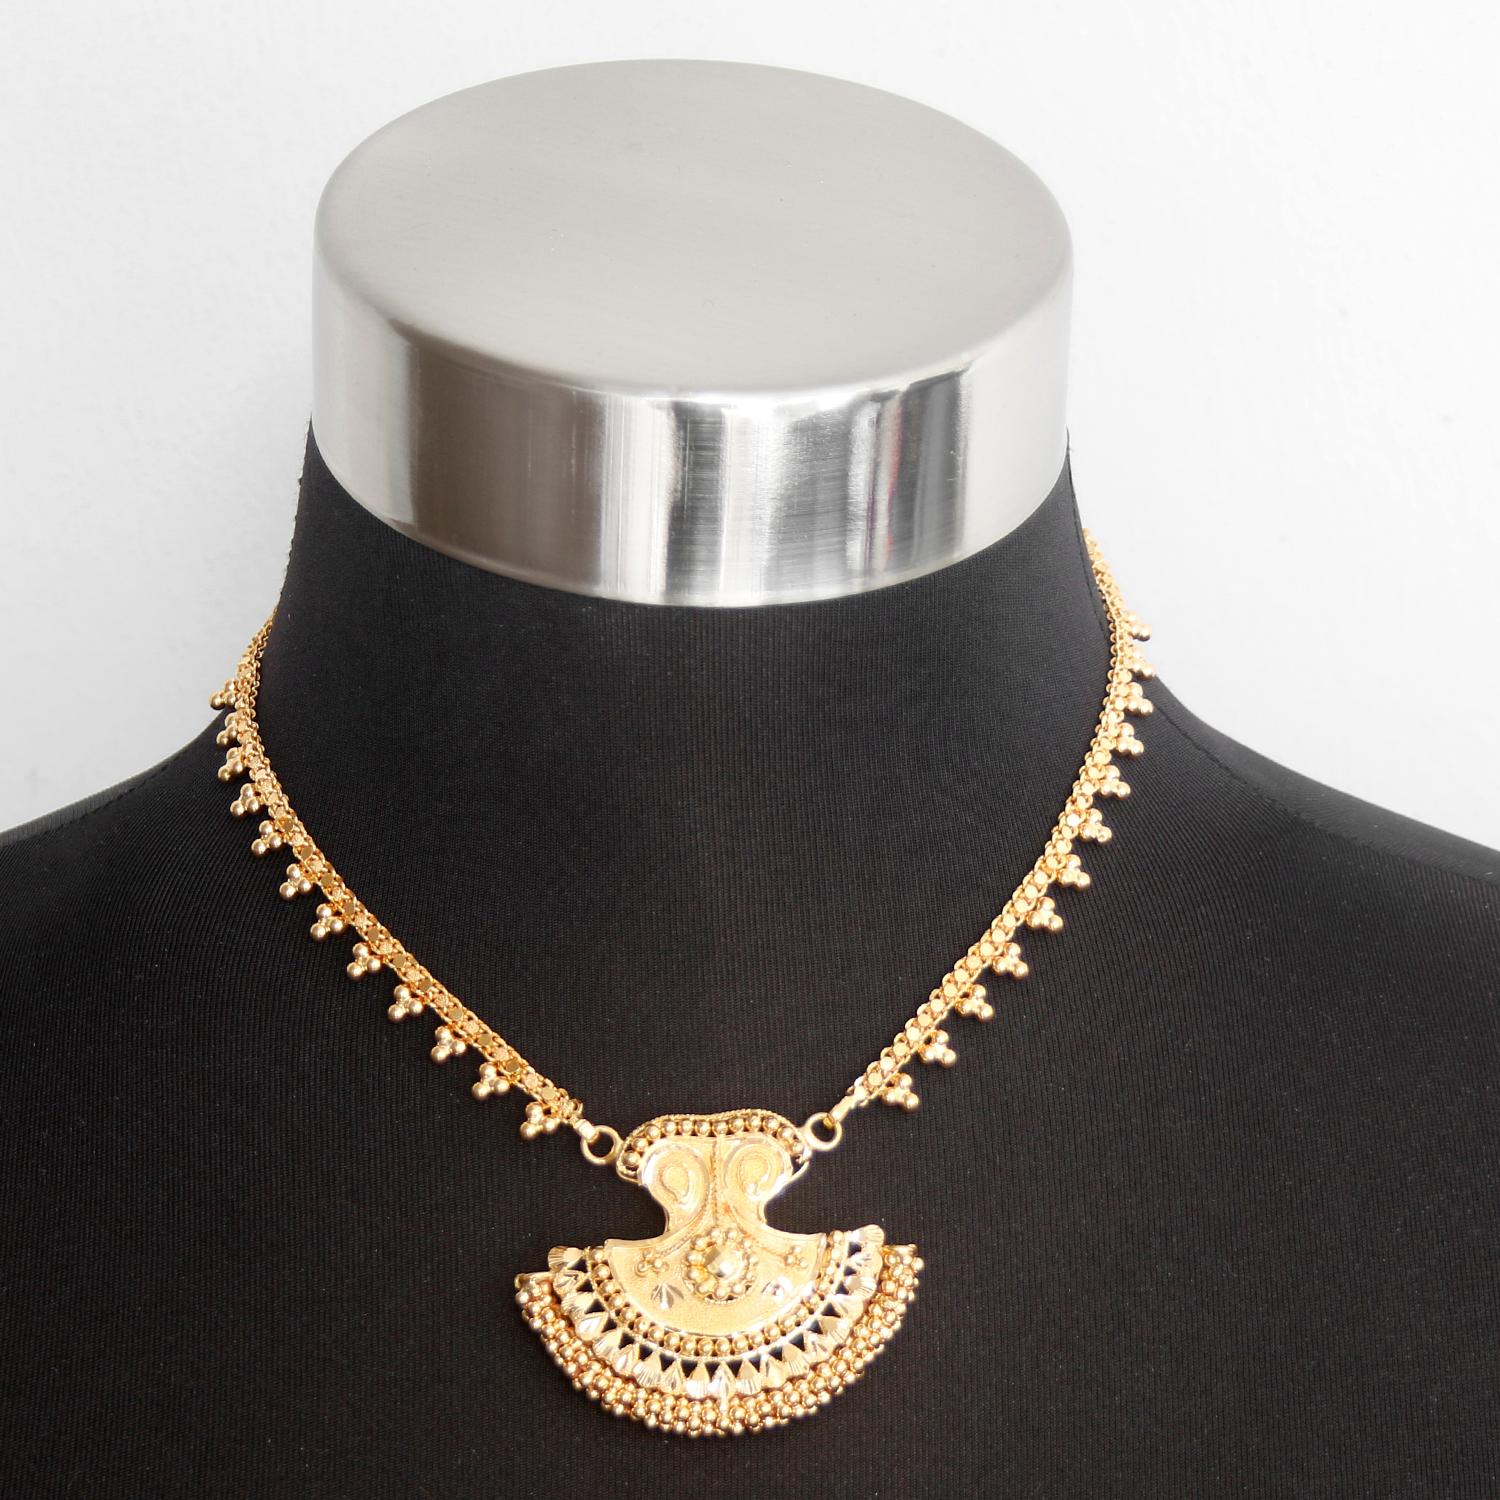 22K Yellow Gold Indian Design Necklace - Beautiful Indian design necklace. 13 inches in length. Total weight 29.5 grams. It is a unique design that can be worn to a wedding or as an every day necklace